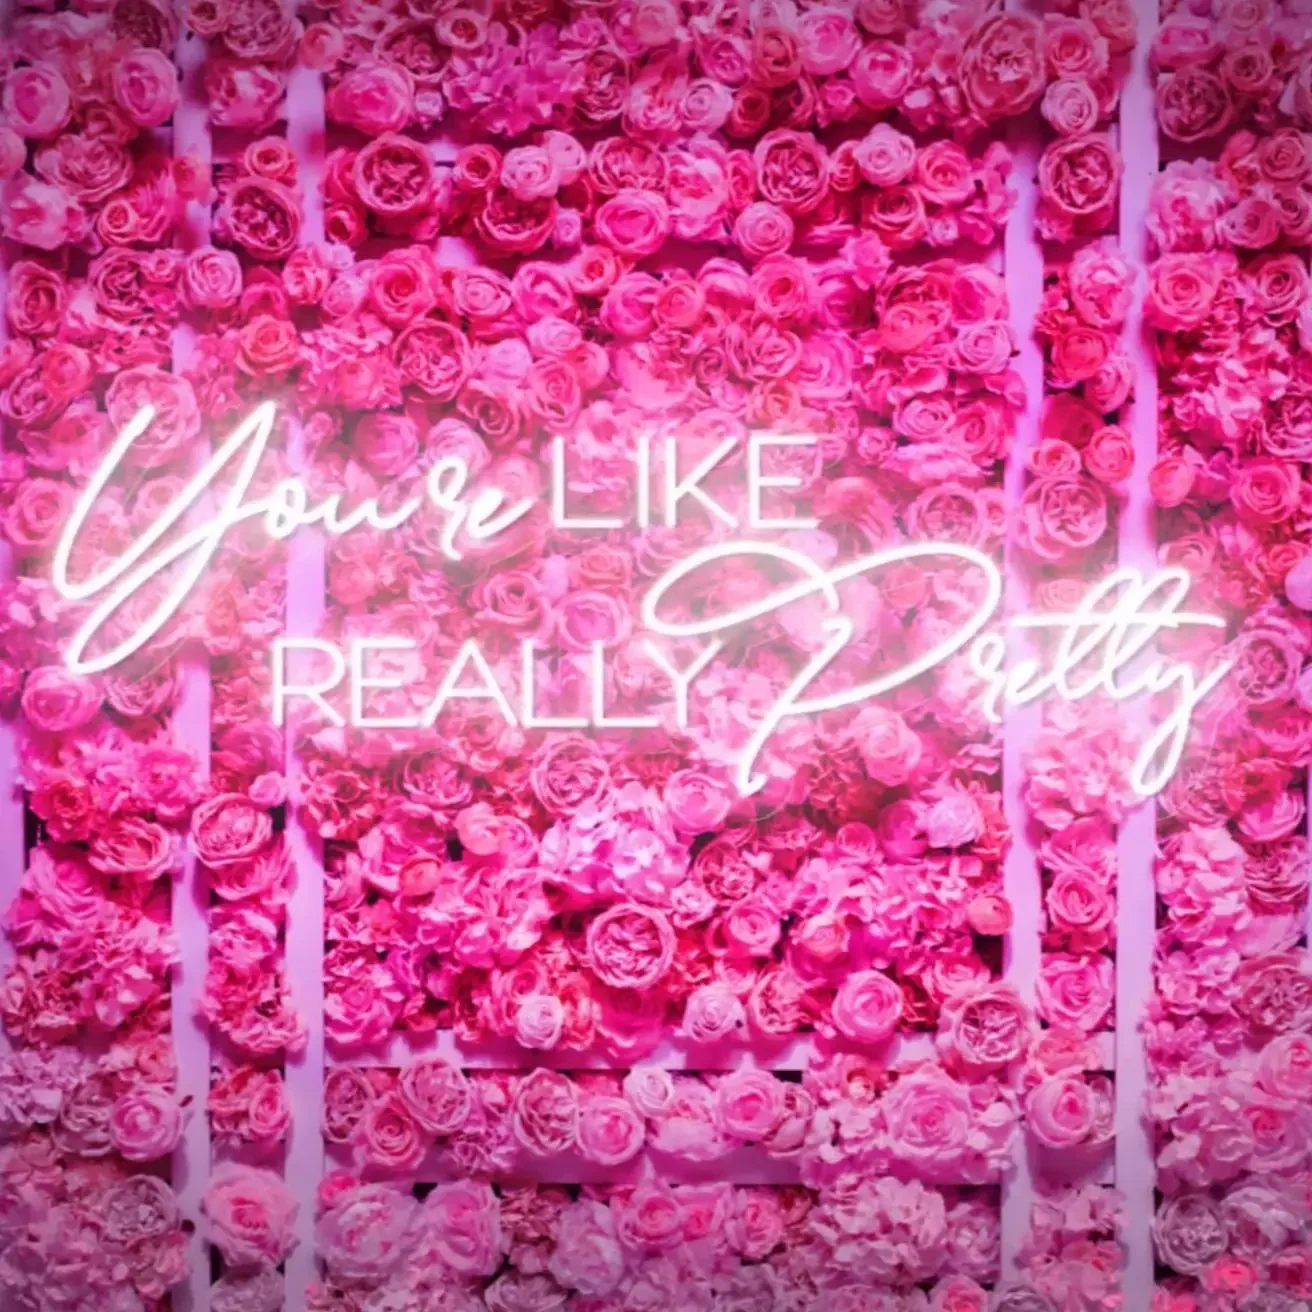 

You Are Like Really Pretty Neon Sign, Pink Neon Led Light, Bedroom Beauty Room Wall Decor, Cafe Bar Backdrop Panel Decoration, B